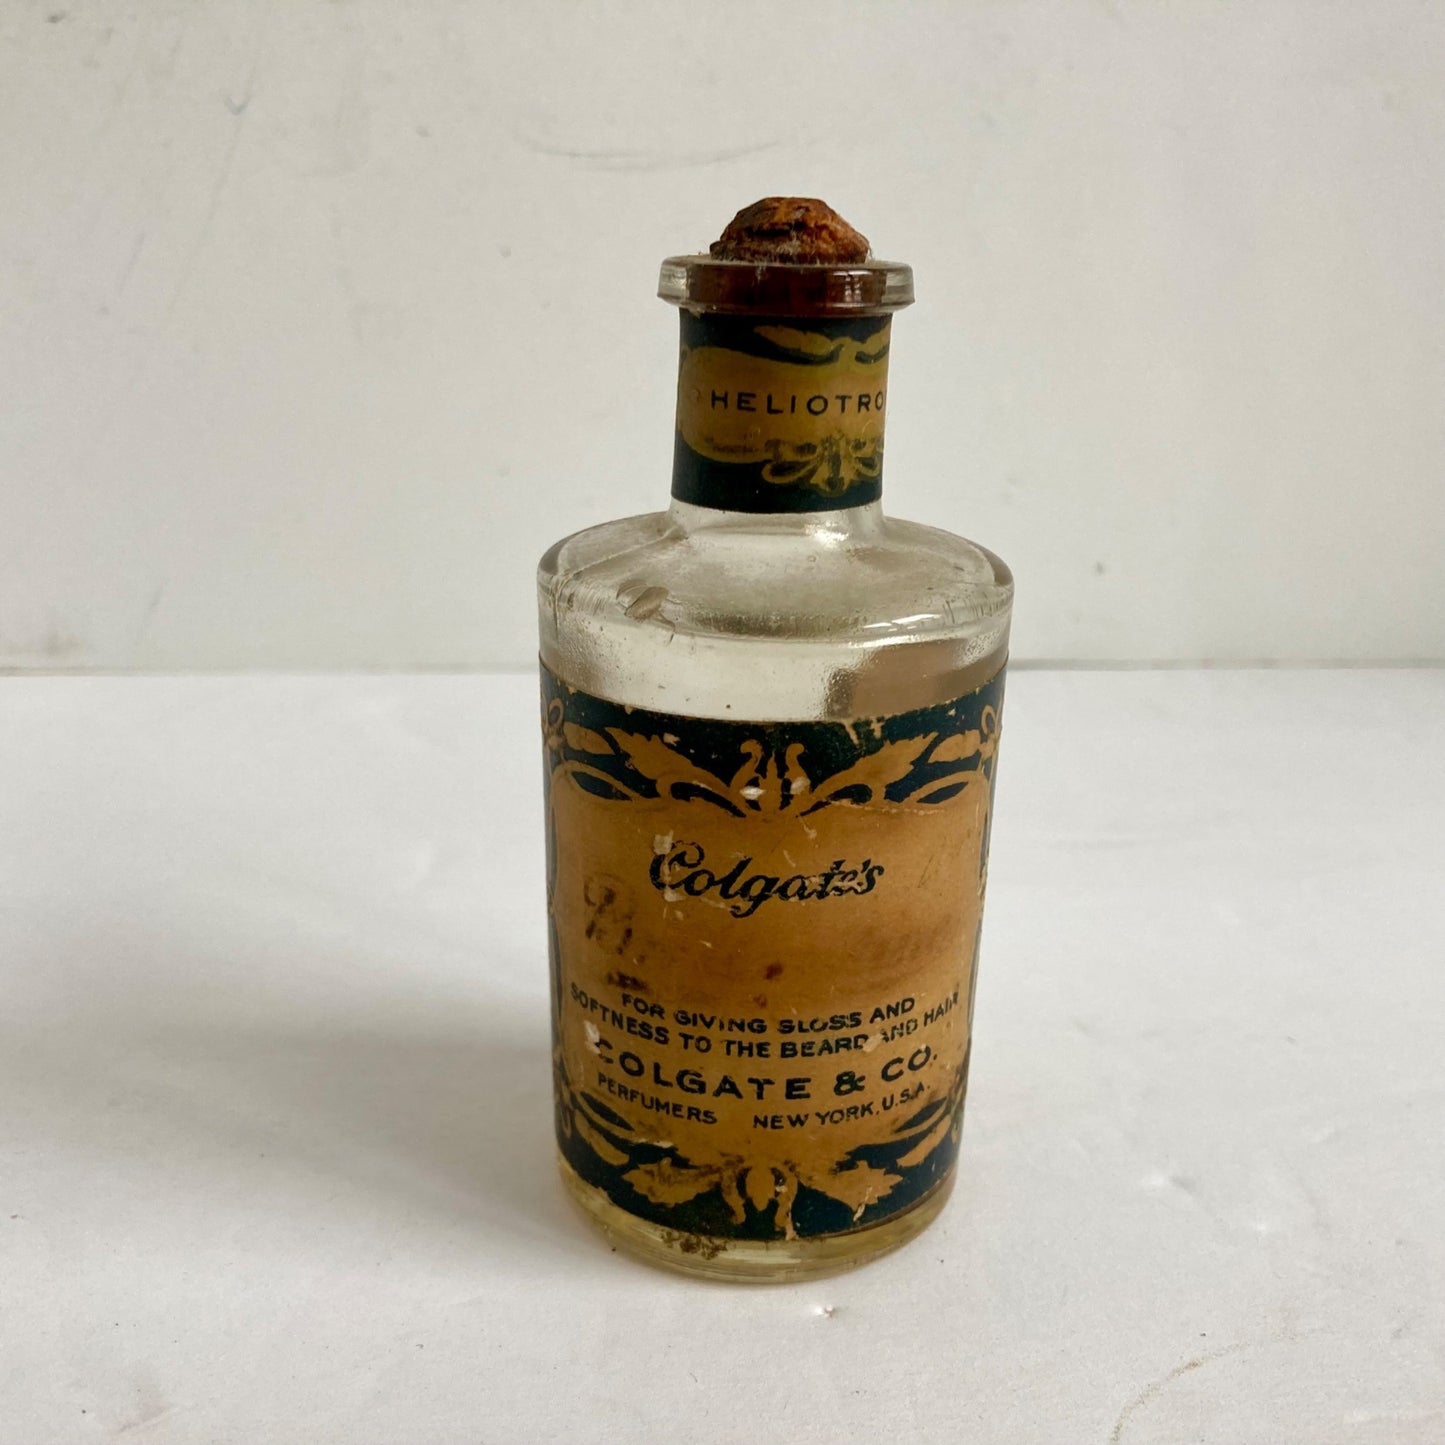 Antique Colegate's Brillantine Heliotrope Gives Gloss to Beard & Hair Vintage